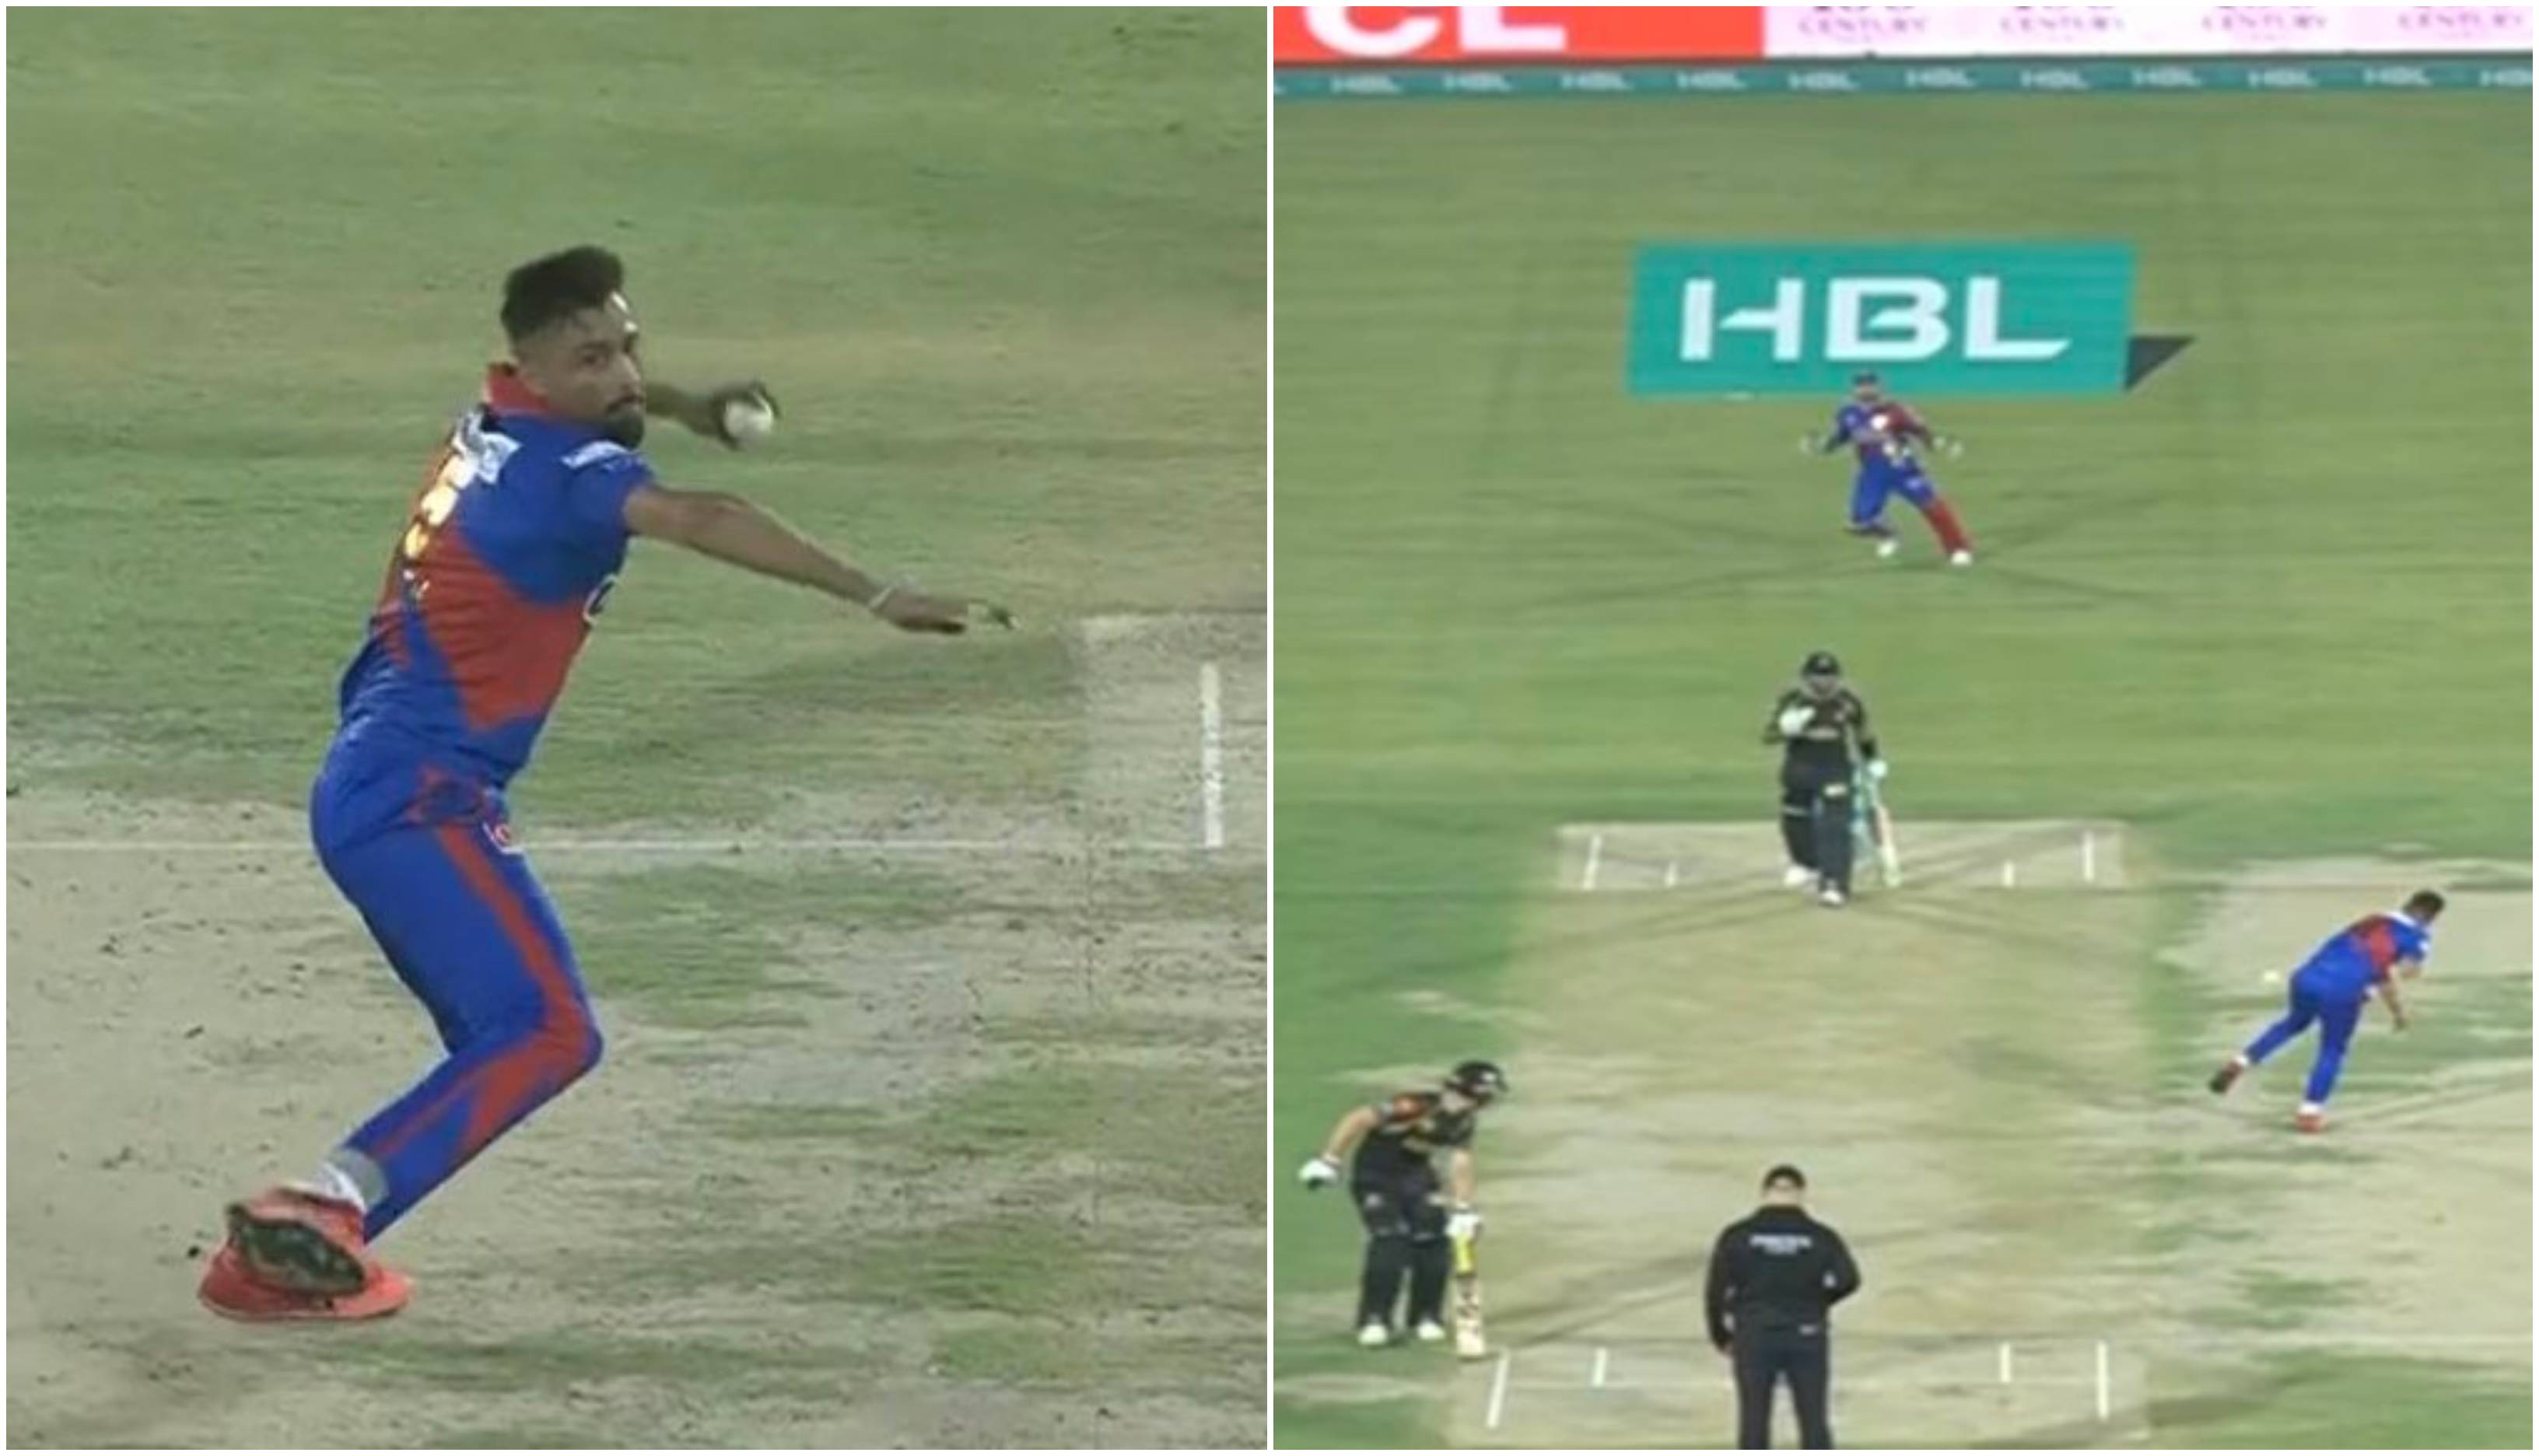 Mohammad Amir threw the ball in anger | Screengrab